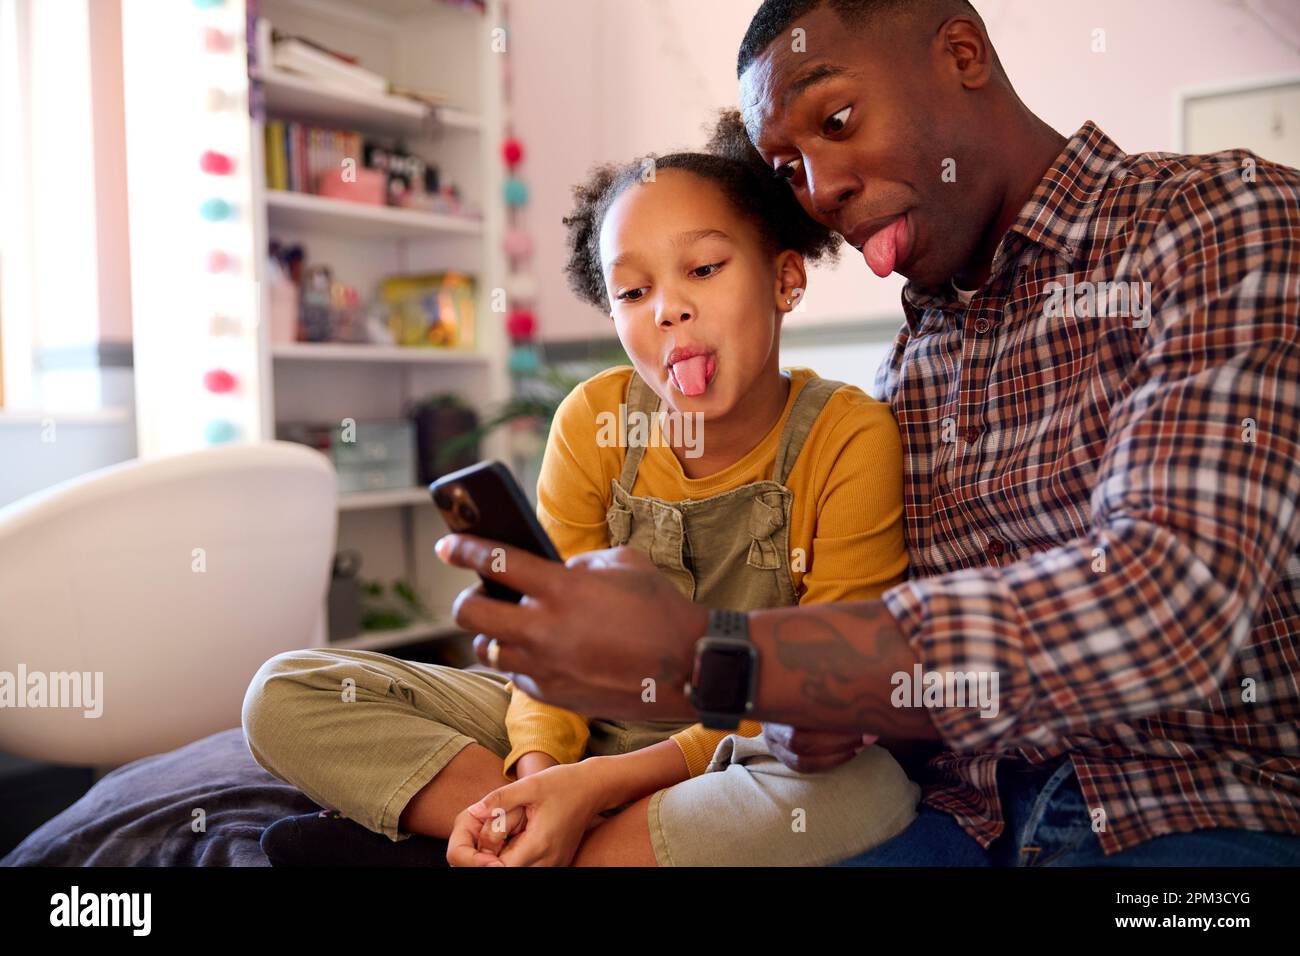 Father And Daughter At Home In Girl's Bedroom Posing For Selfie On Mobile Phone Pulling Faces Stock Photo